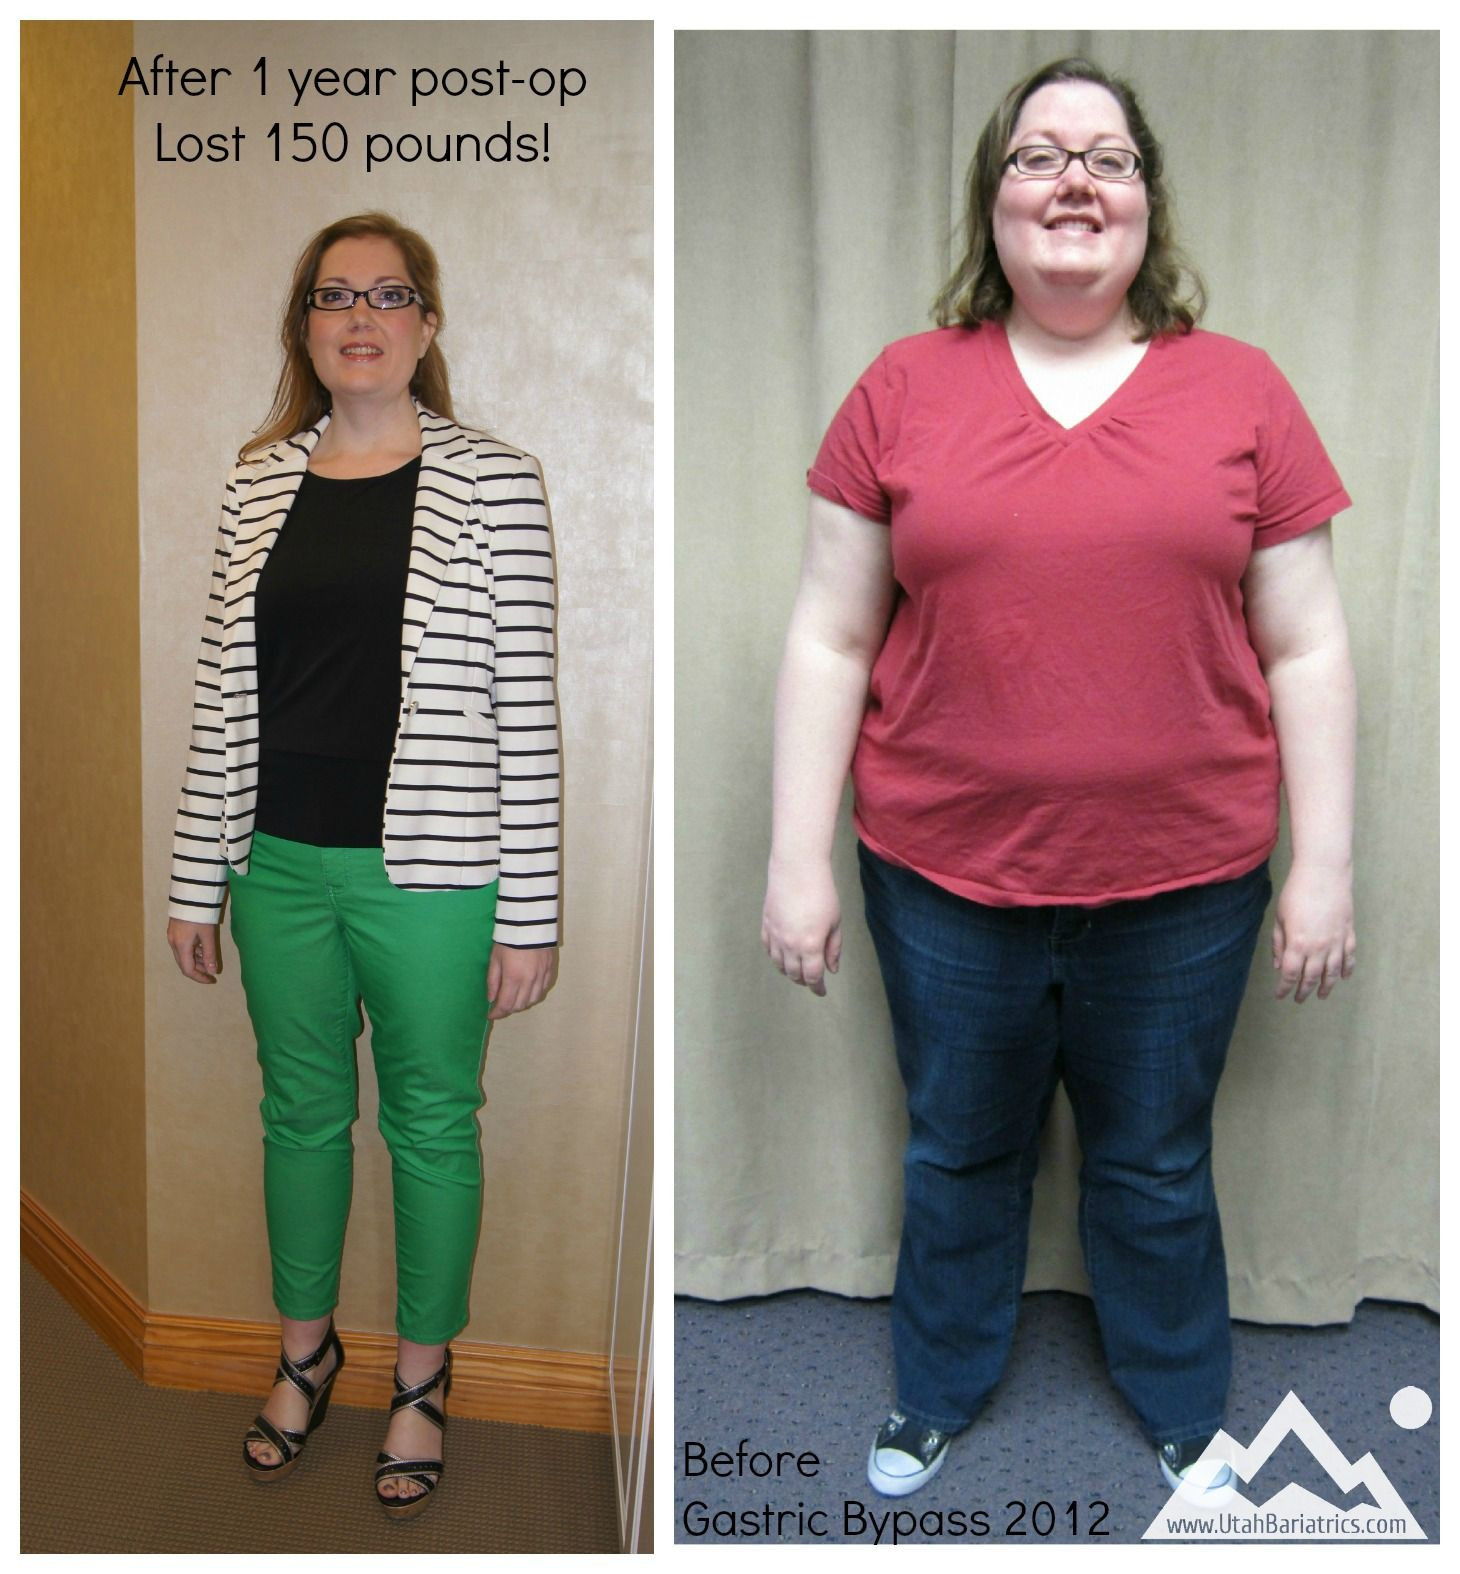 How To Dress After Weight Loss Surgery
 JESSICA LOST OVER 150 LBS AFTER GASTRIC BYPASS SURGERY